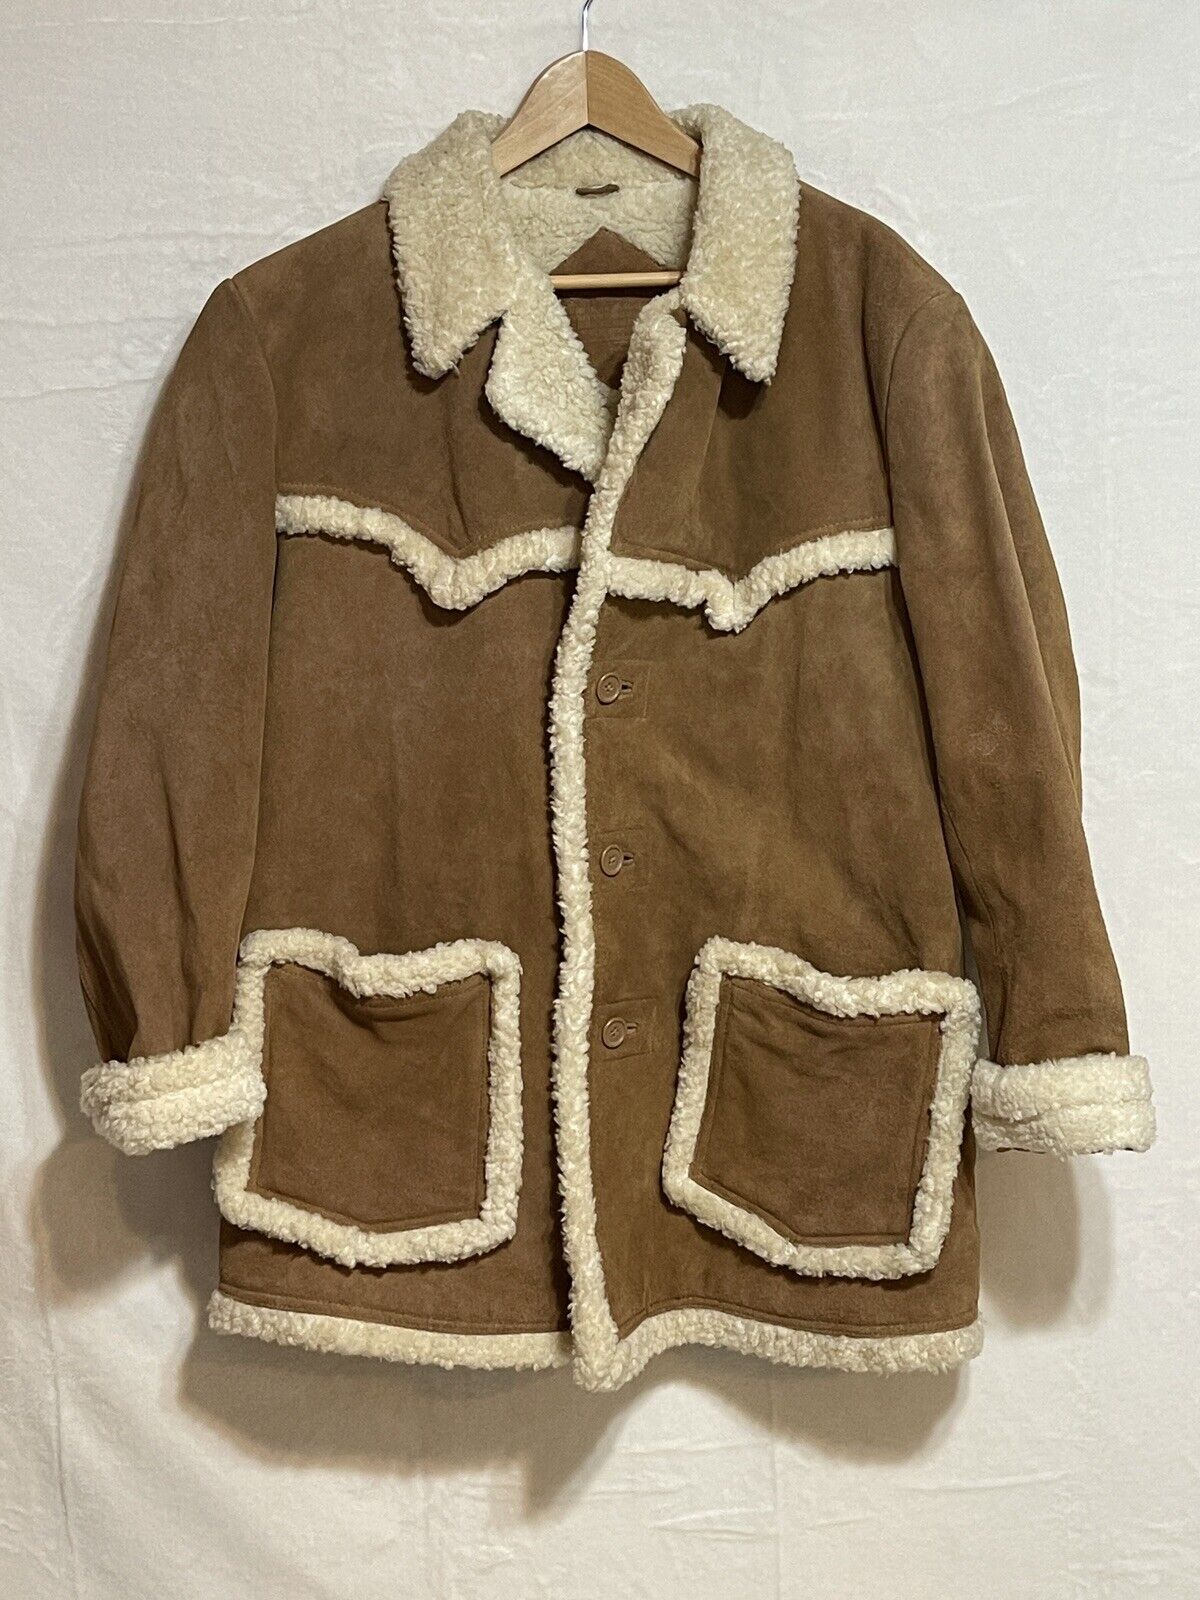 Vintage Rancher Jacket Mens 44 Suede Sherpa Lined Western Farm Coat Yellowstone